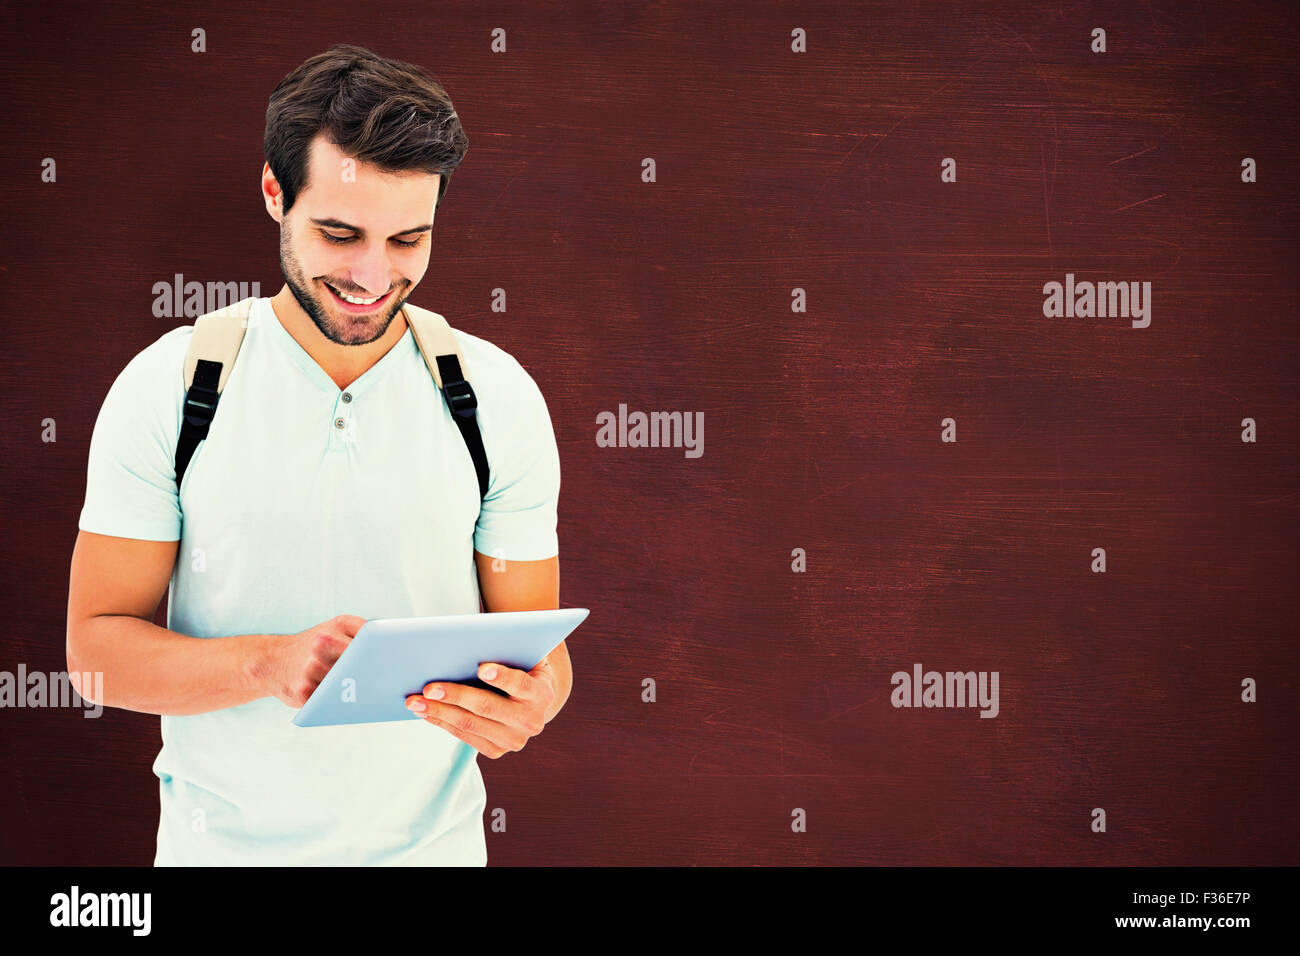 Composite image of student using tablet pc Stock Photo